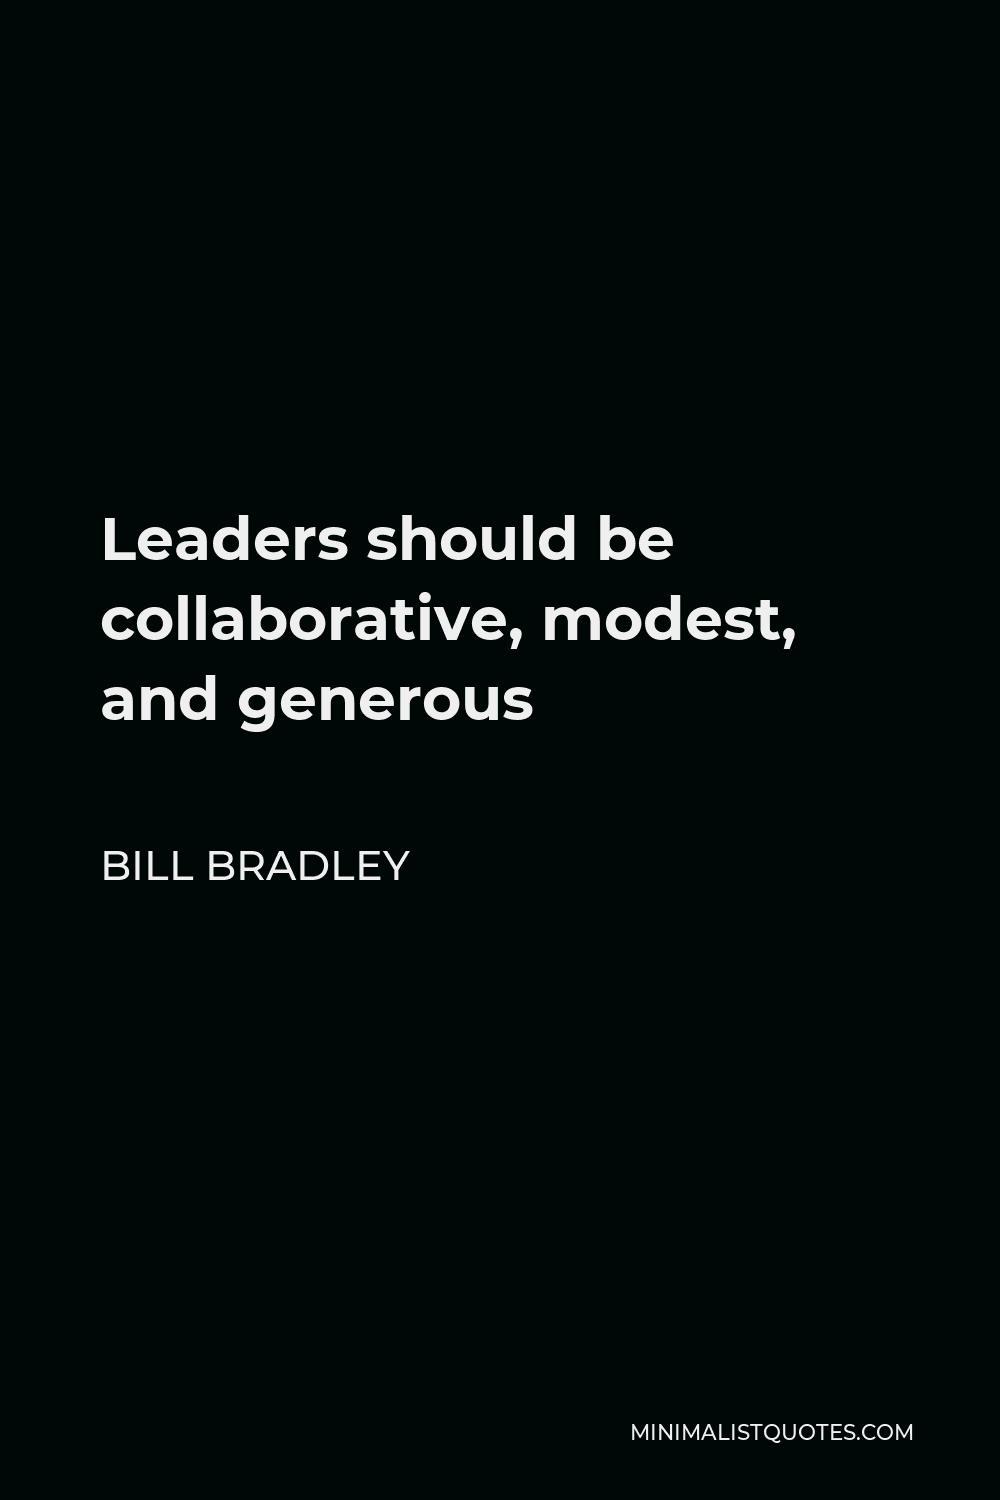 Bill Bradley Quote - Leaders should be collaborative, modest, and generous